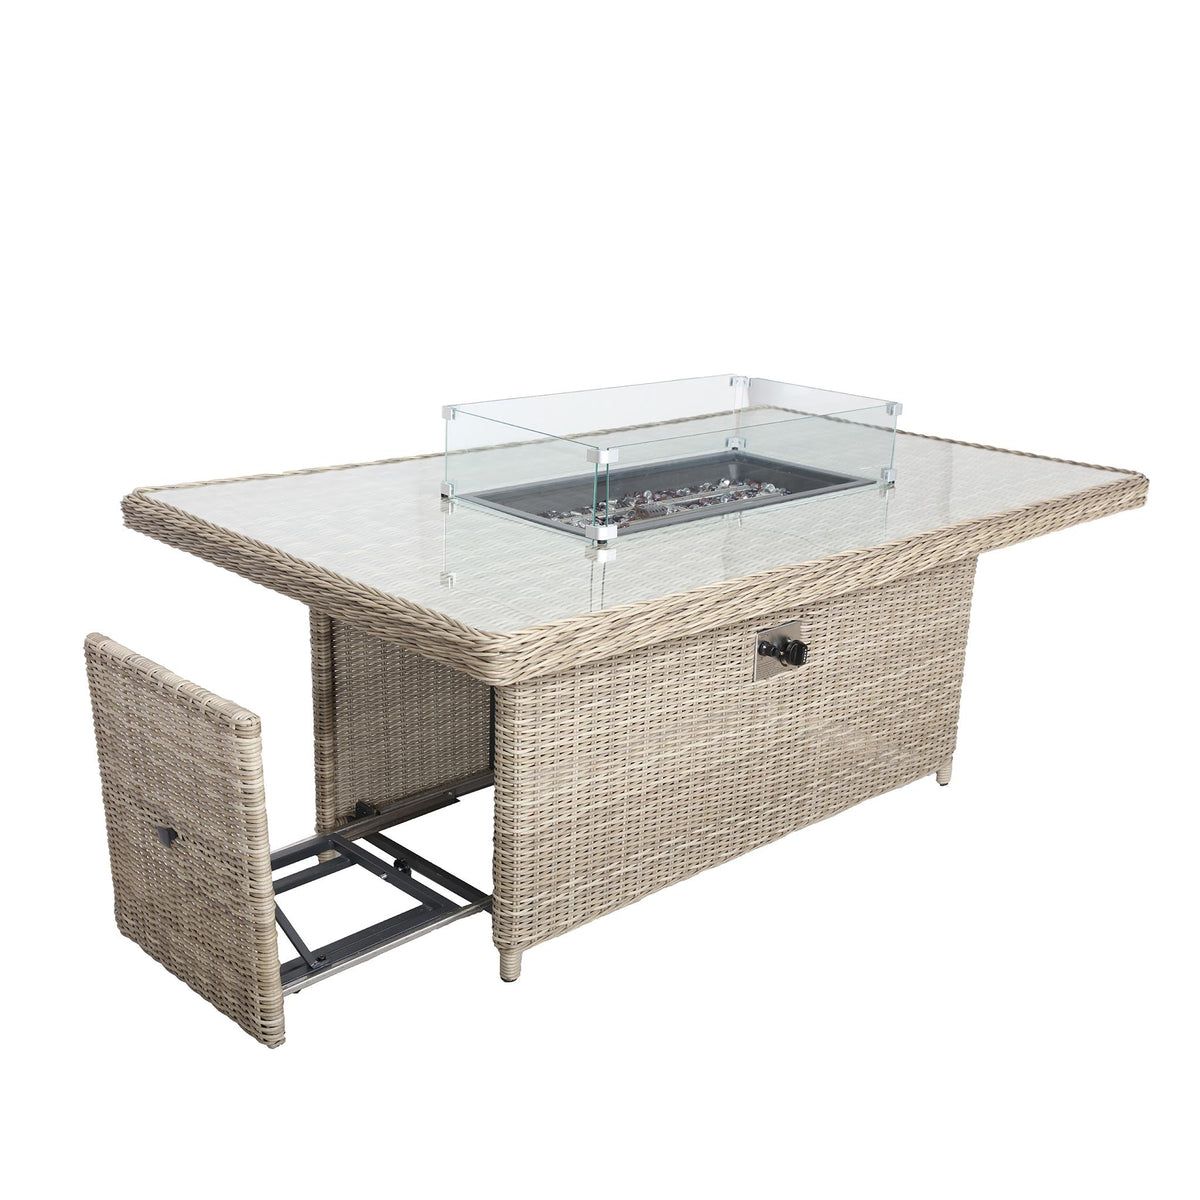 Wentworth Rattan 170cm Fire Pit Garden Dining Table & Lounge Set with gas compartment 